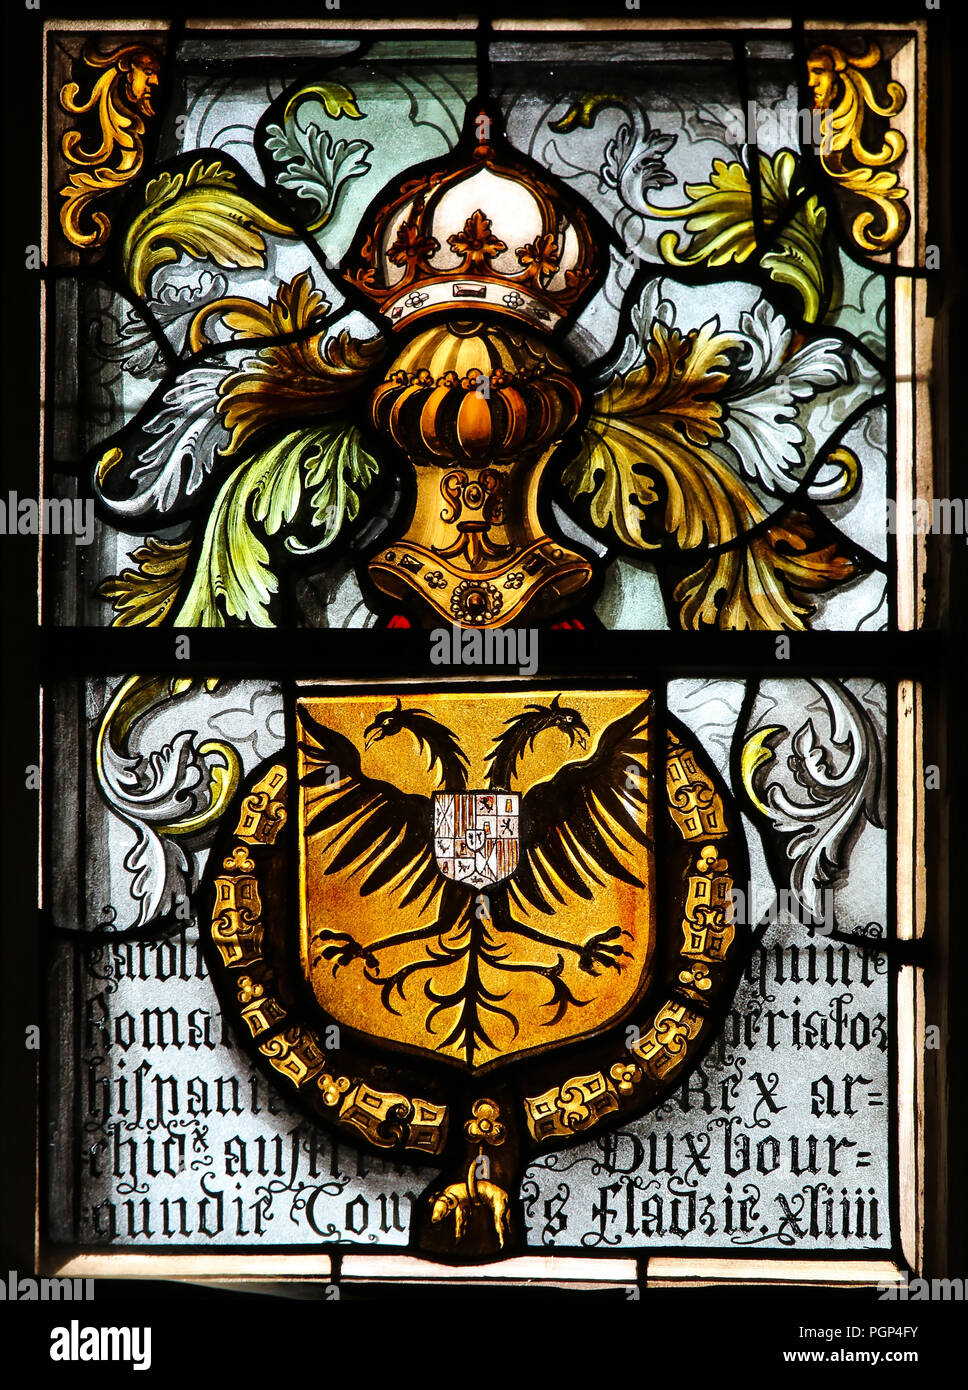 Stained Glass in the Basilica of the Holy Blood in Bruges, Belgium, depicting the Double-headed eagle or Imperial Eagle, Coat of Arms of the Holy Roma Stock Photo